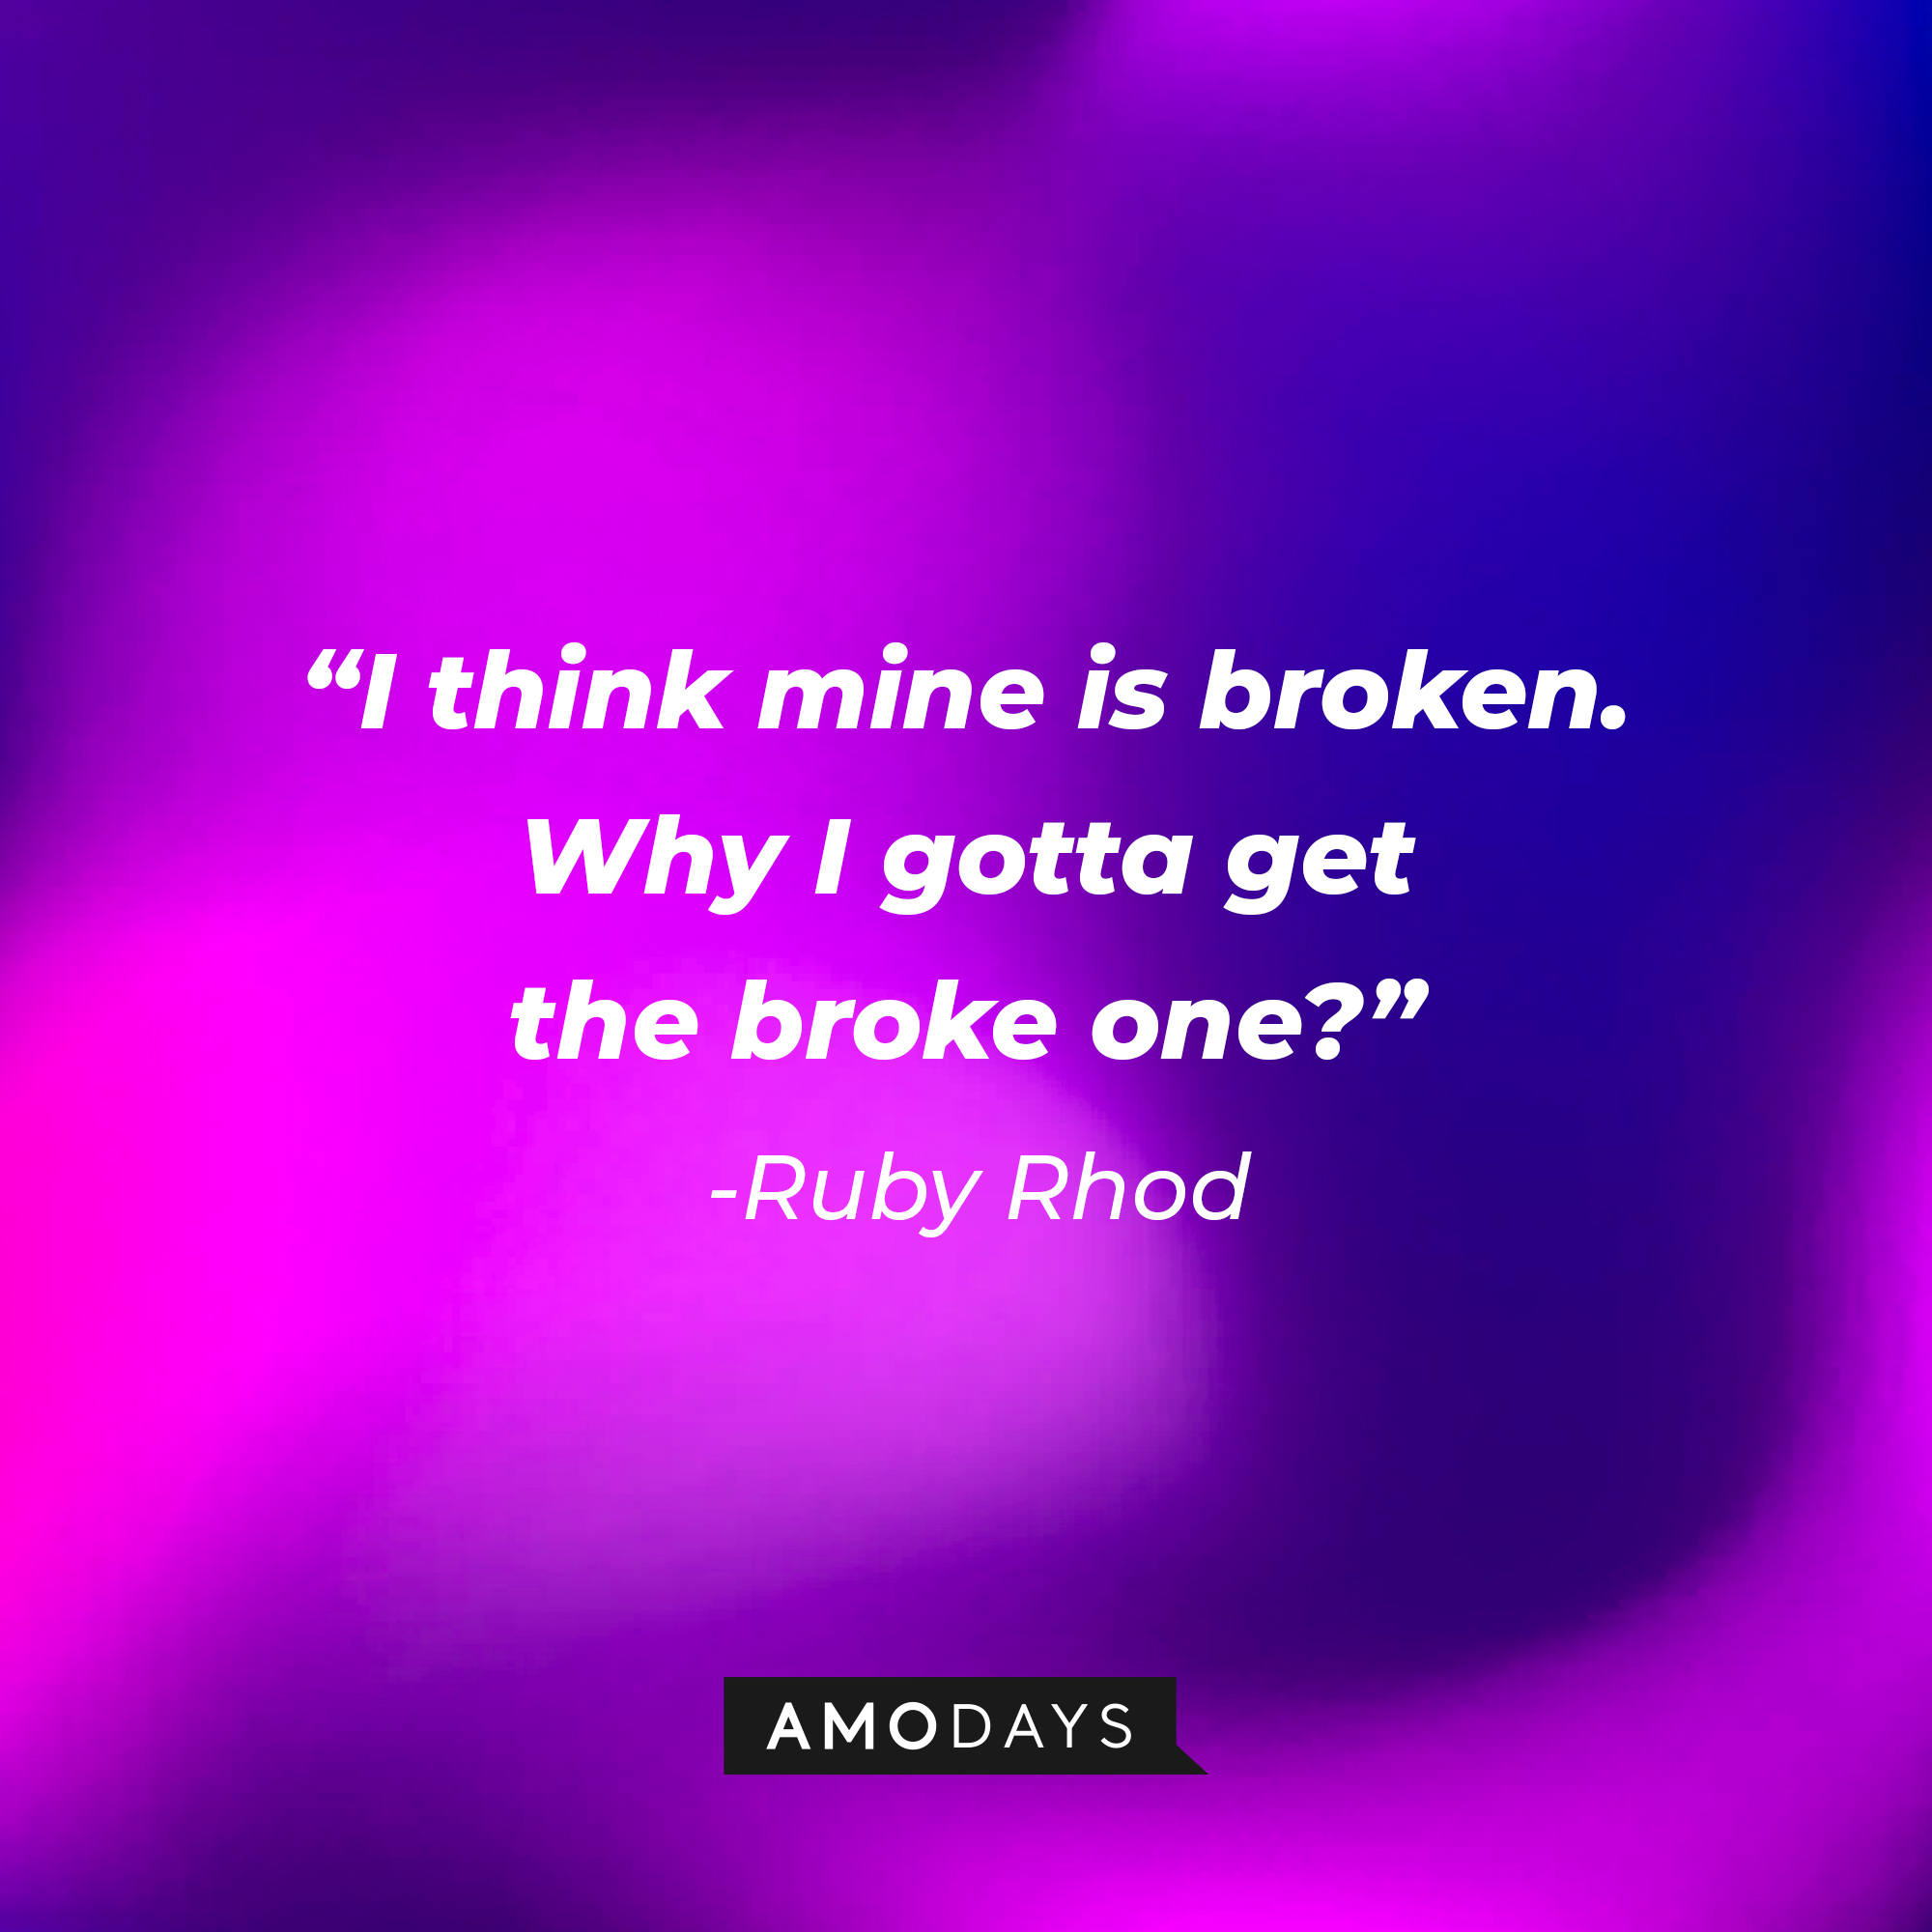 A photo with Ruby Rhod's quote, "I think mine is broken. Why I gotta get the broke one?" | Source: Amodays